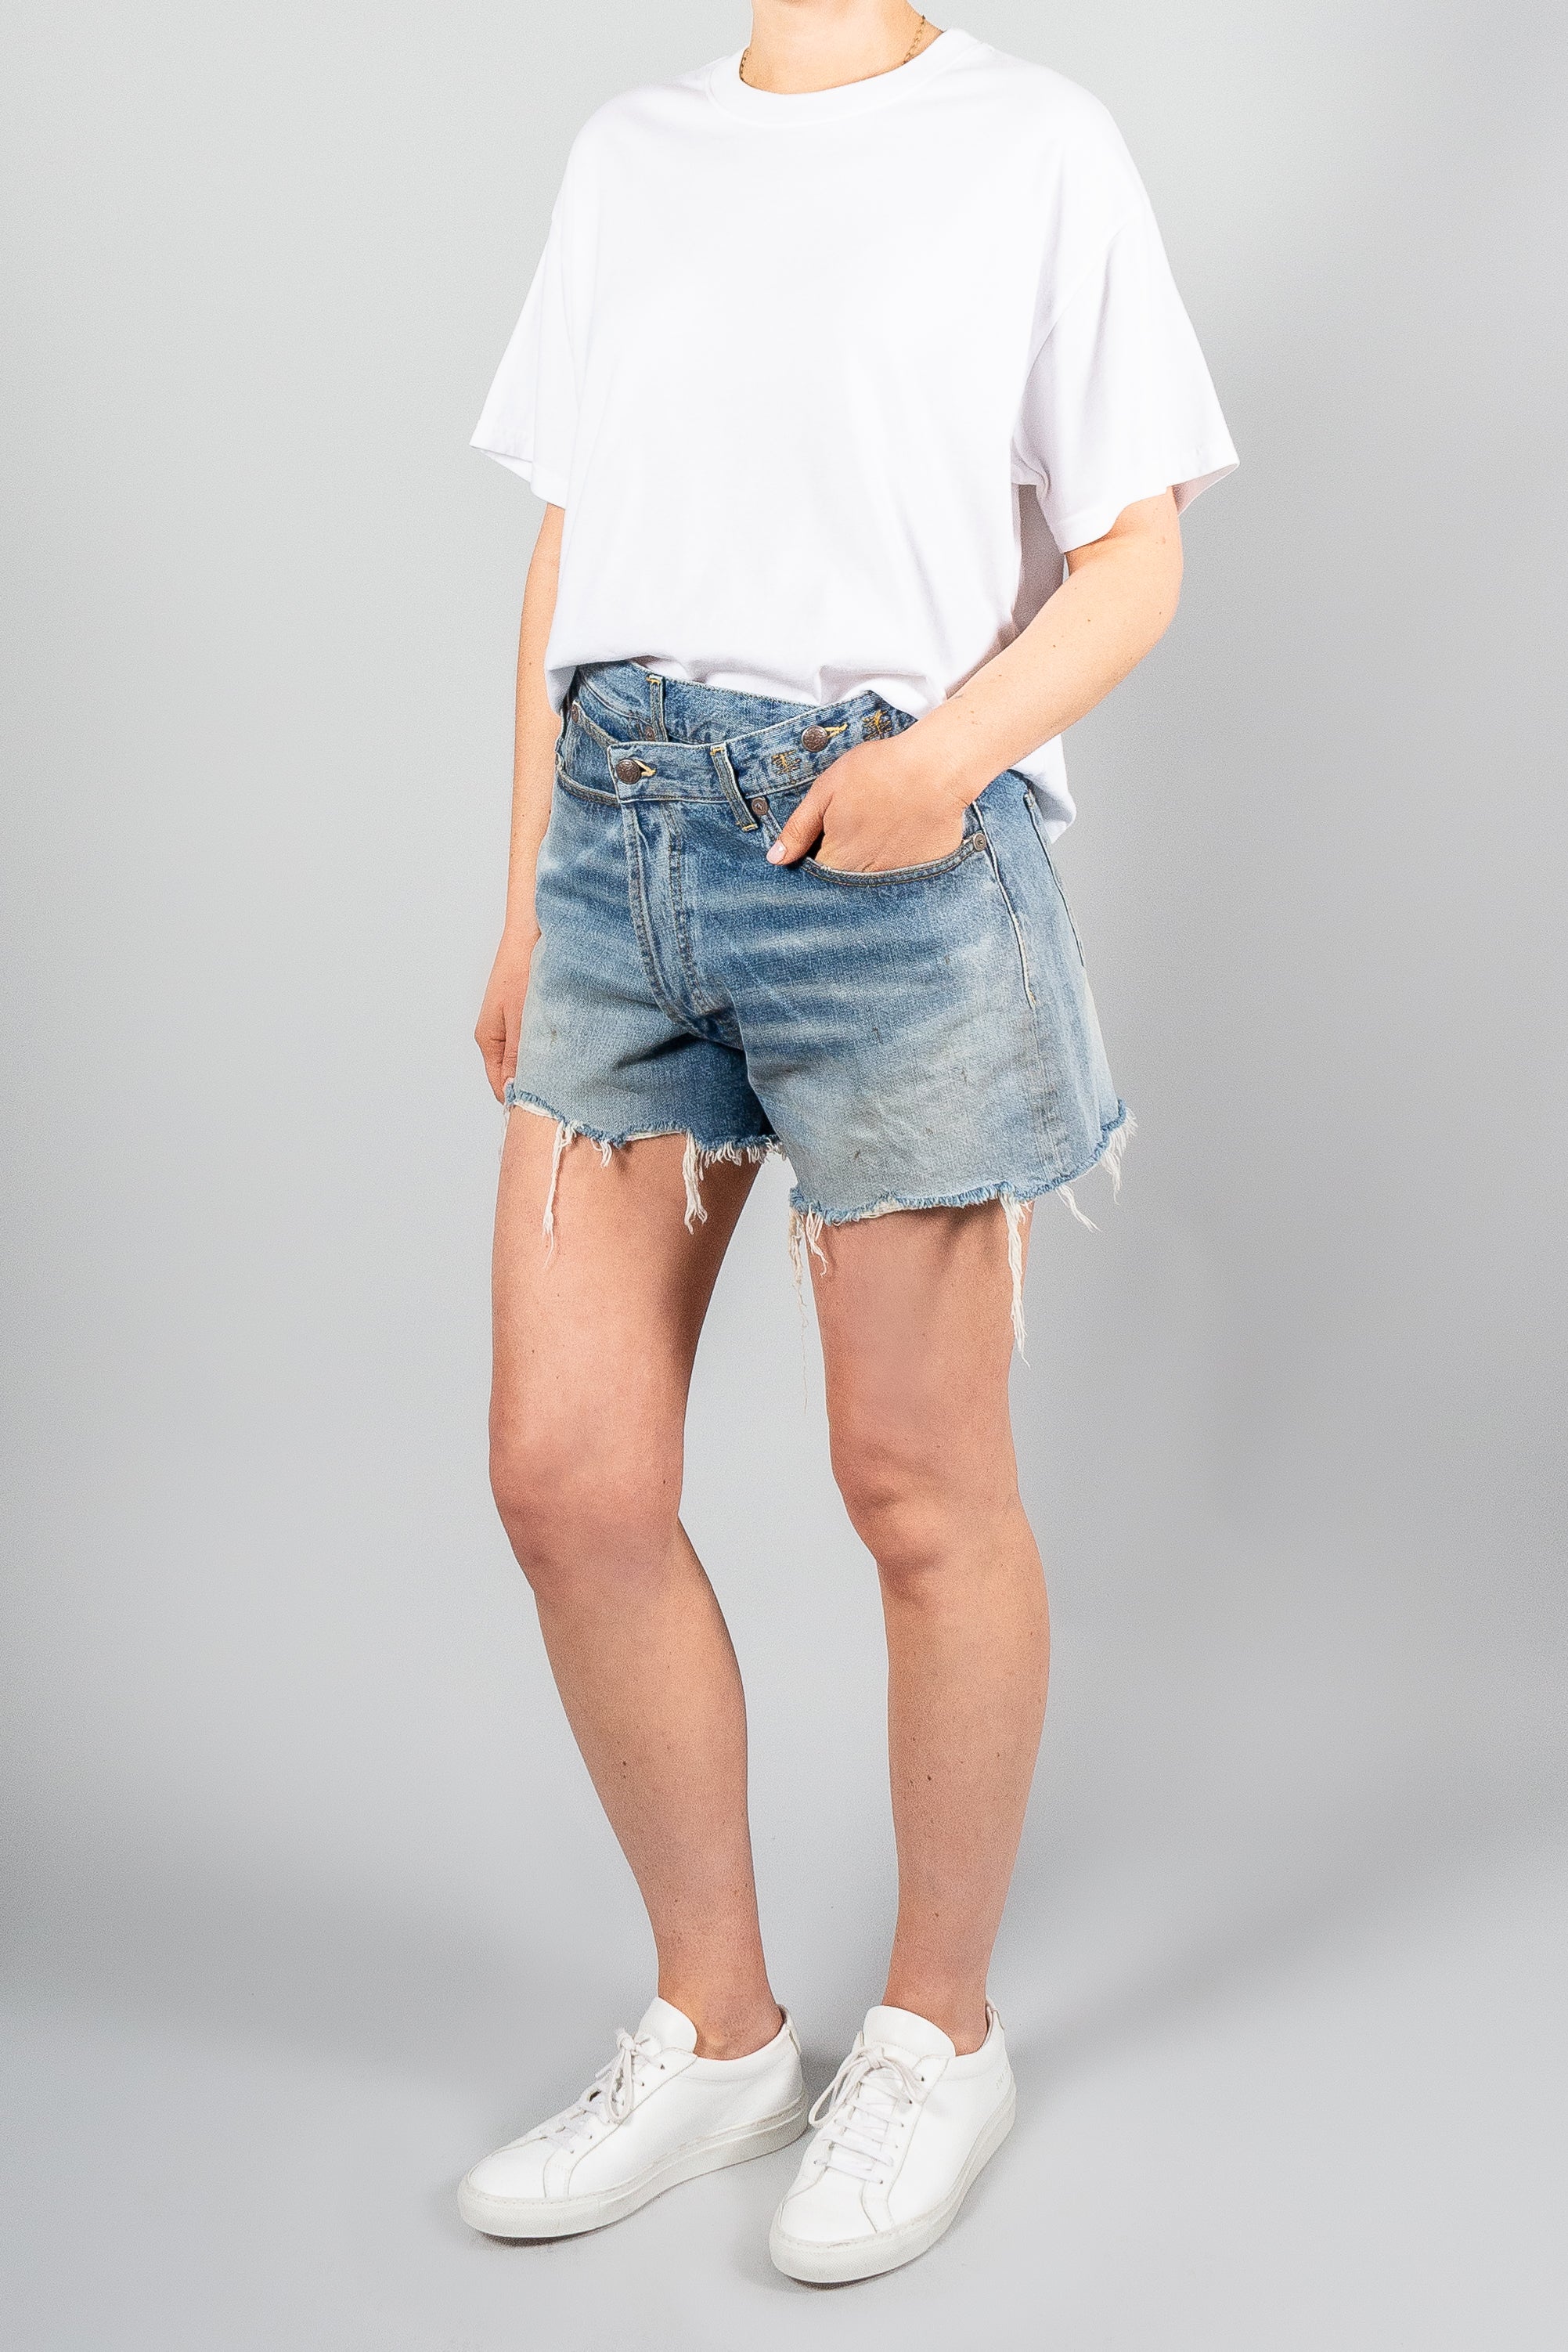 R13 Crossover Short-Pants and Shorts-Misch-Boutique-Vancouver-Canada-misch.ca